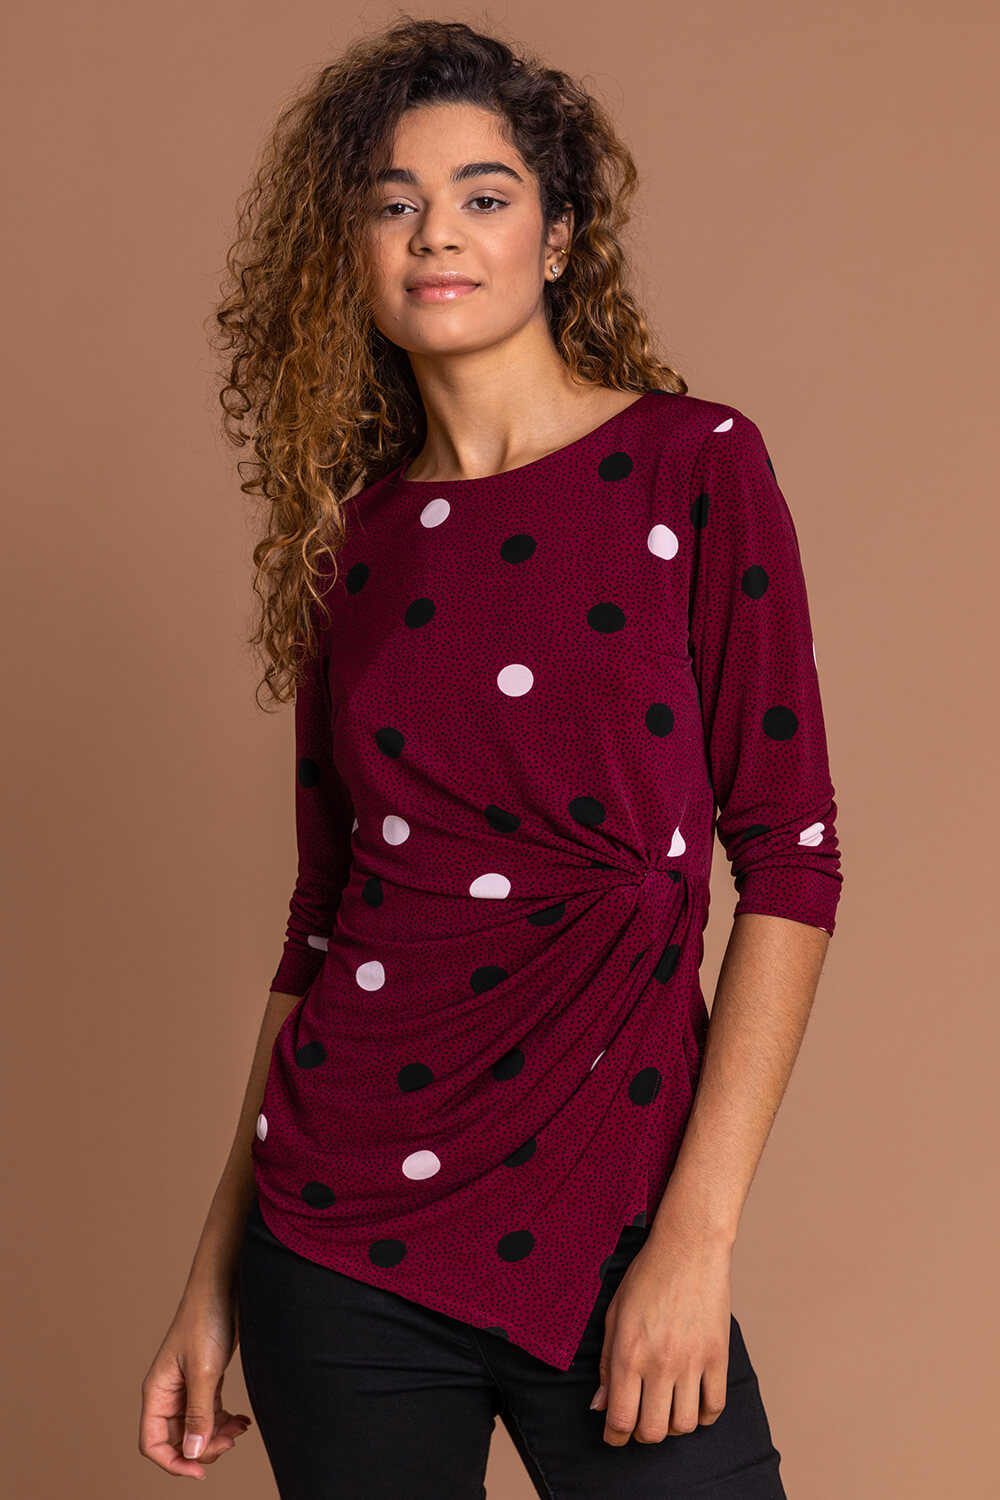 Bordeaux Polka Dot Ruched 3/4 Sleeve Jersey Top, Image 5 of 5